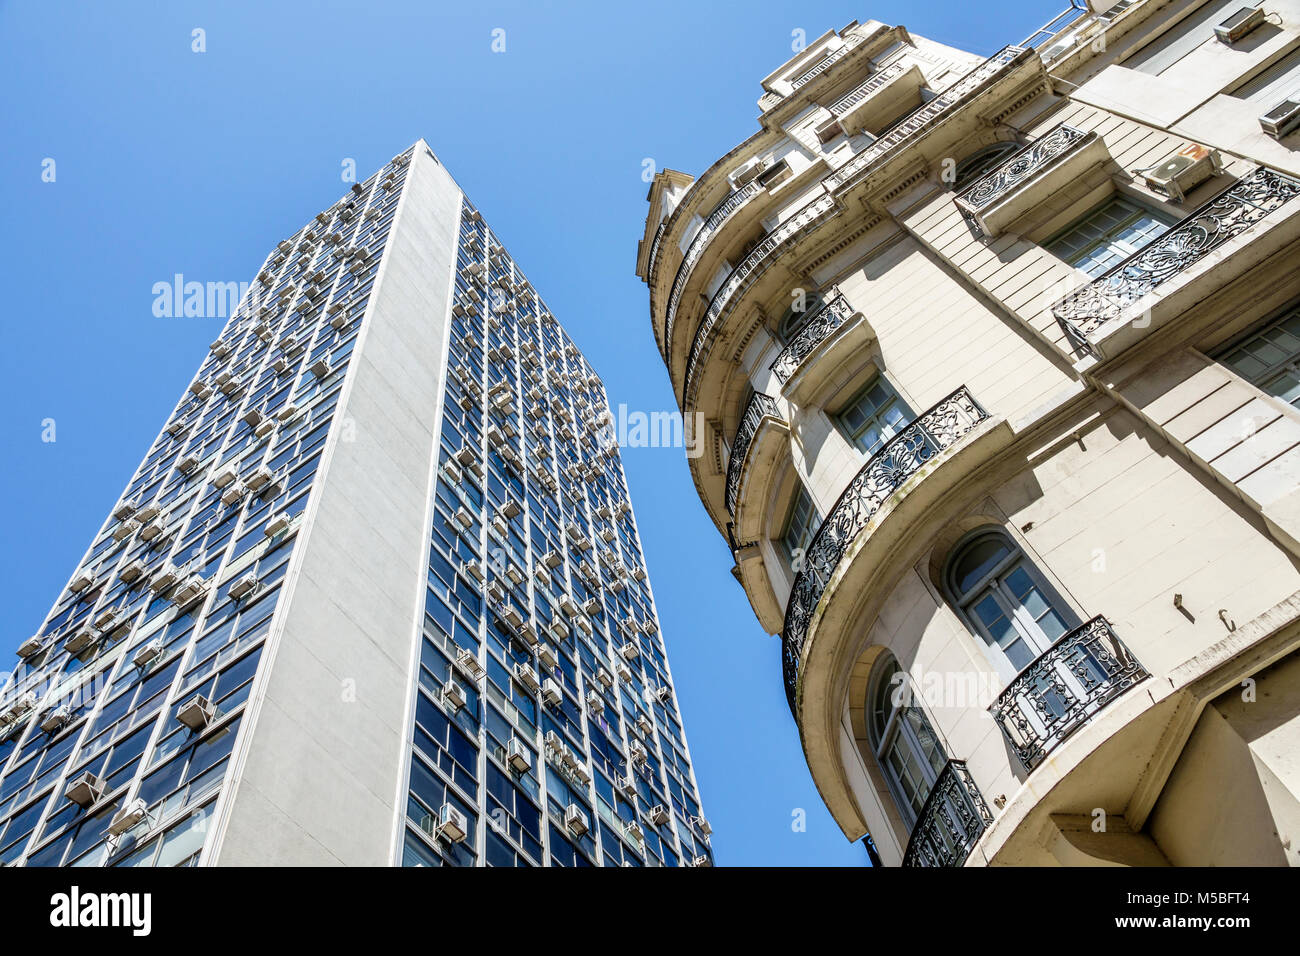 Buenos Aires Argentina,Retiro,modern,art nouveau,architecture,contrasting,old,new,buildings,air conditioning units,ARG171128007 Stock Photo